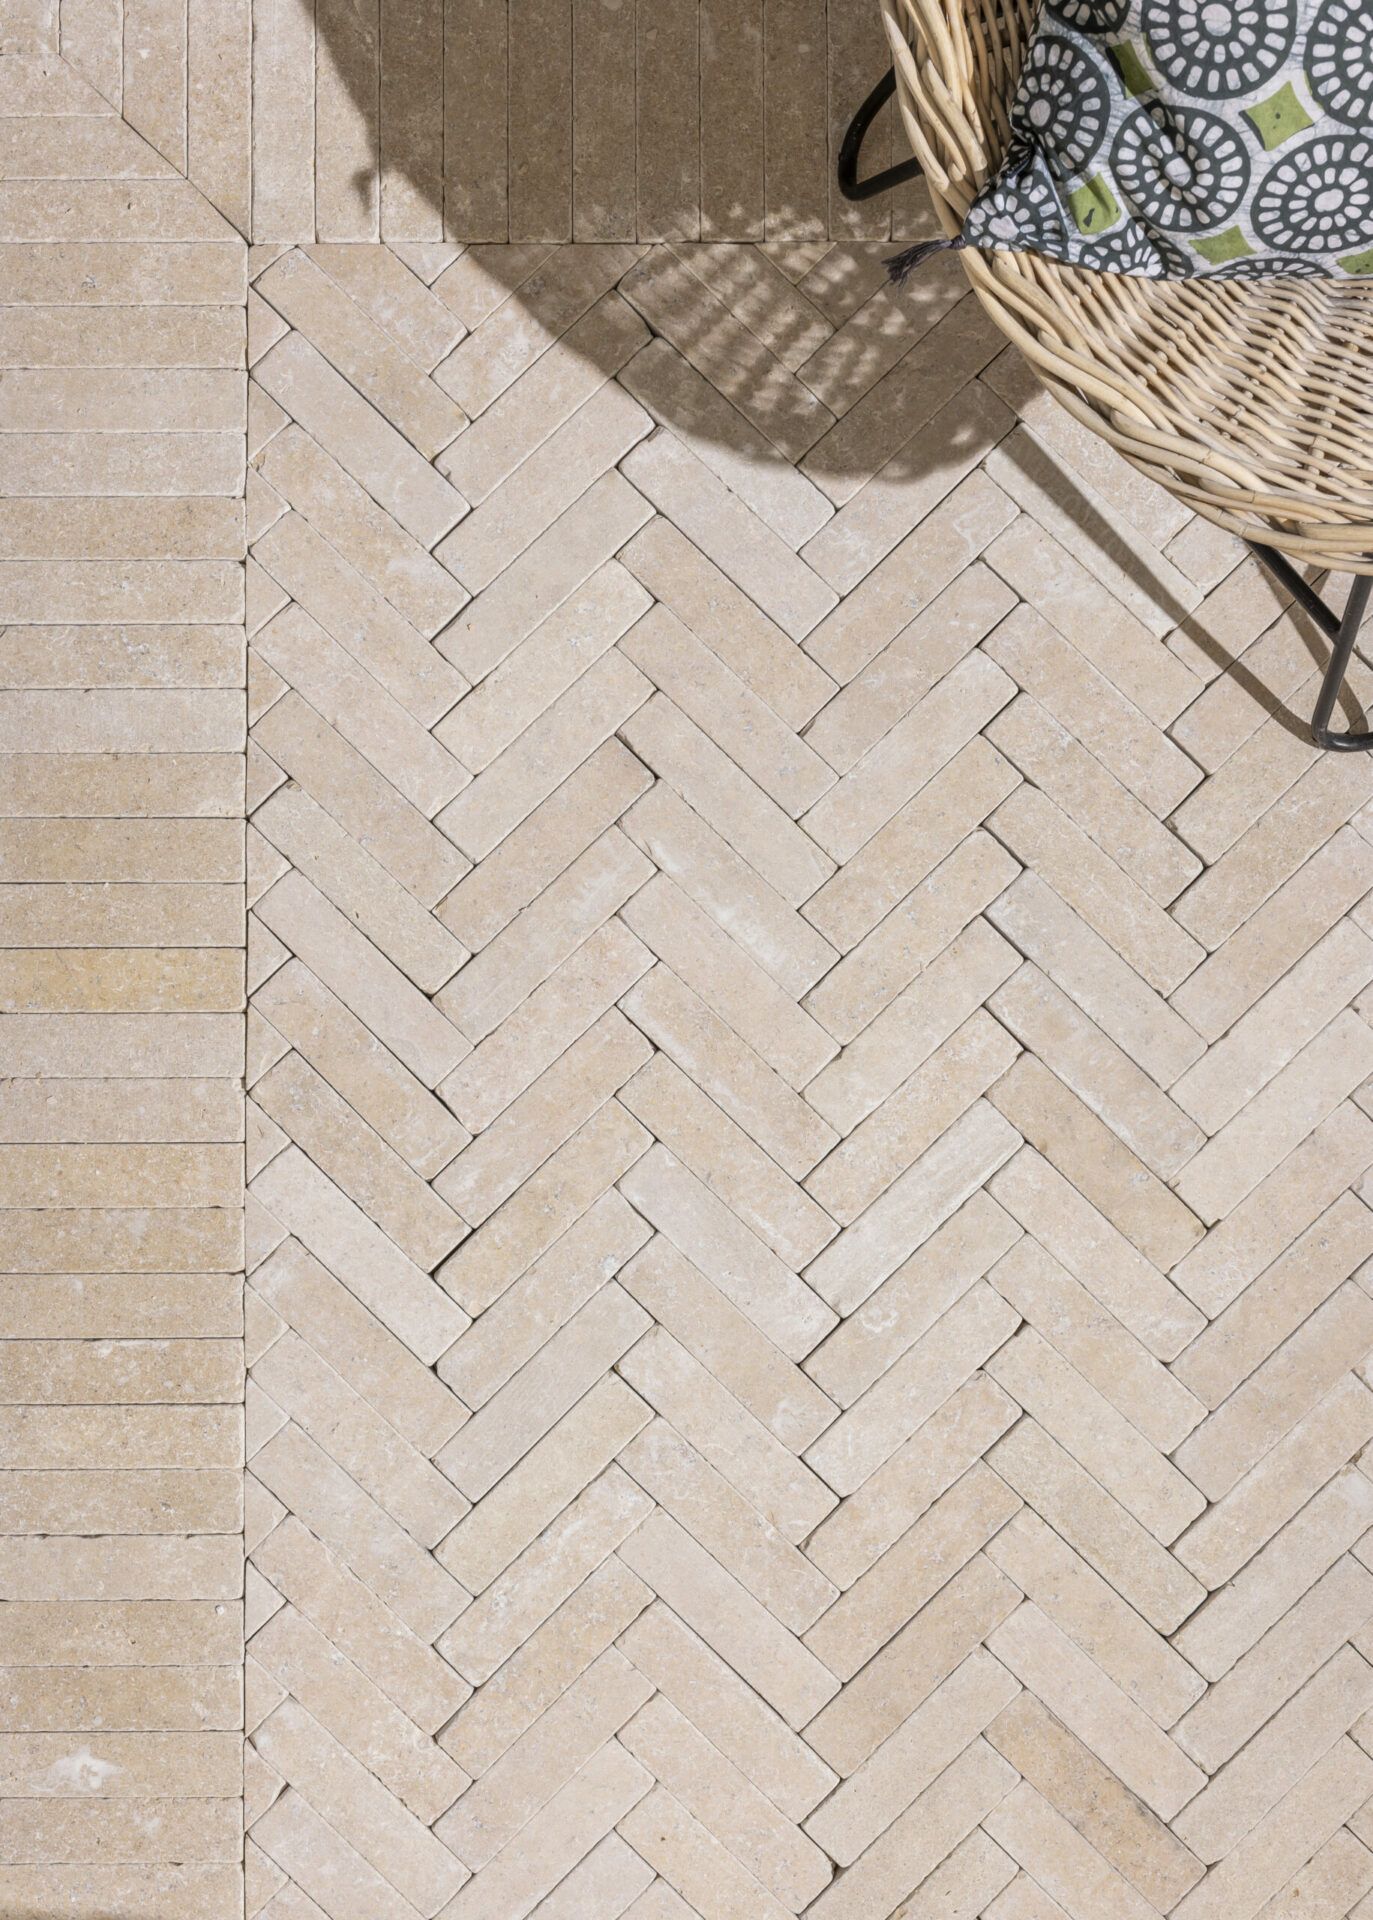 Enhance Your Outdoor Space with Stylish Garden Tiles